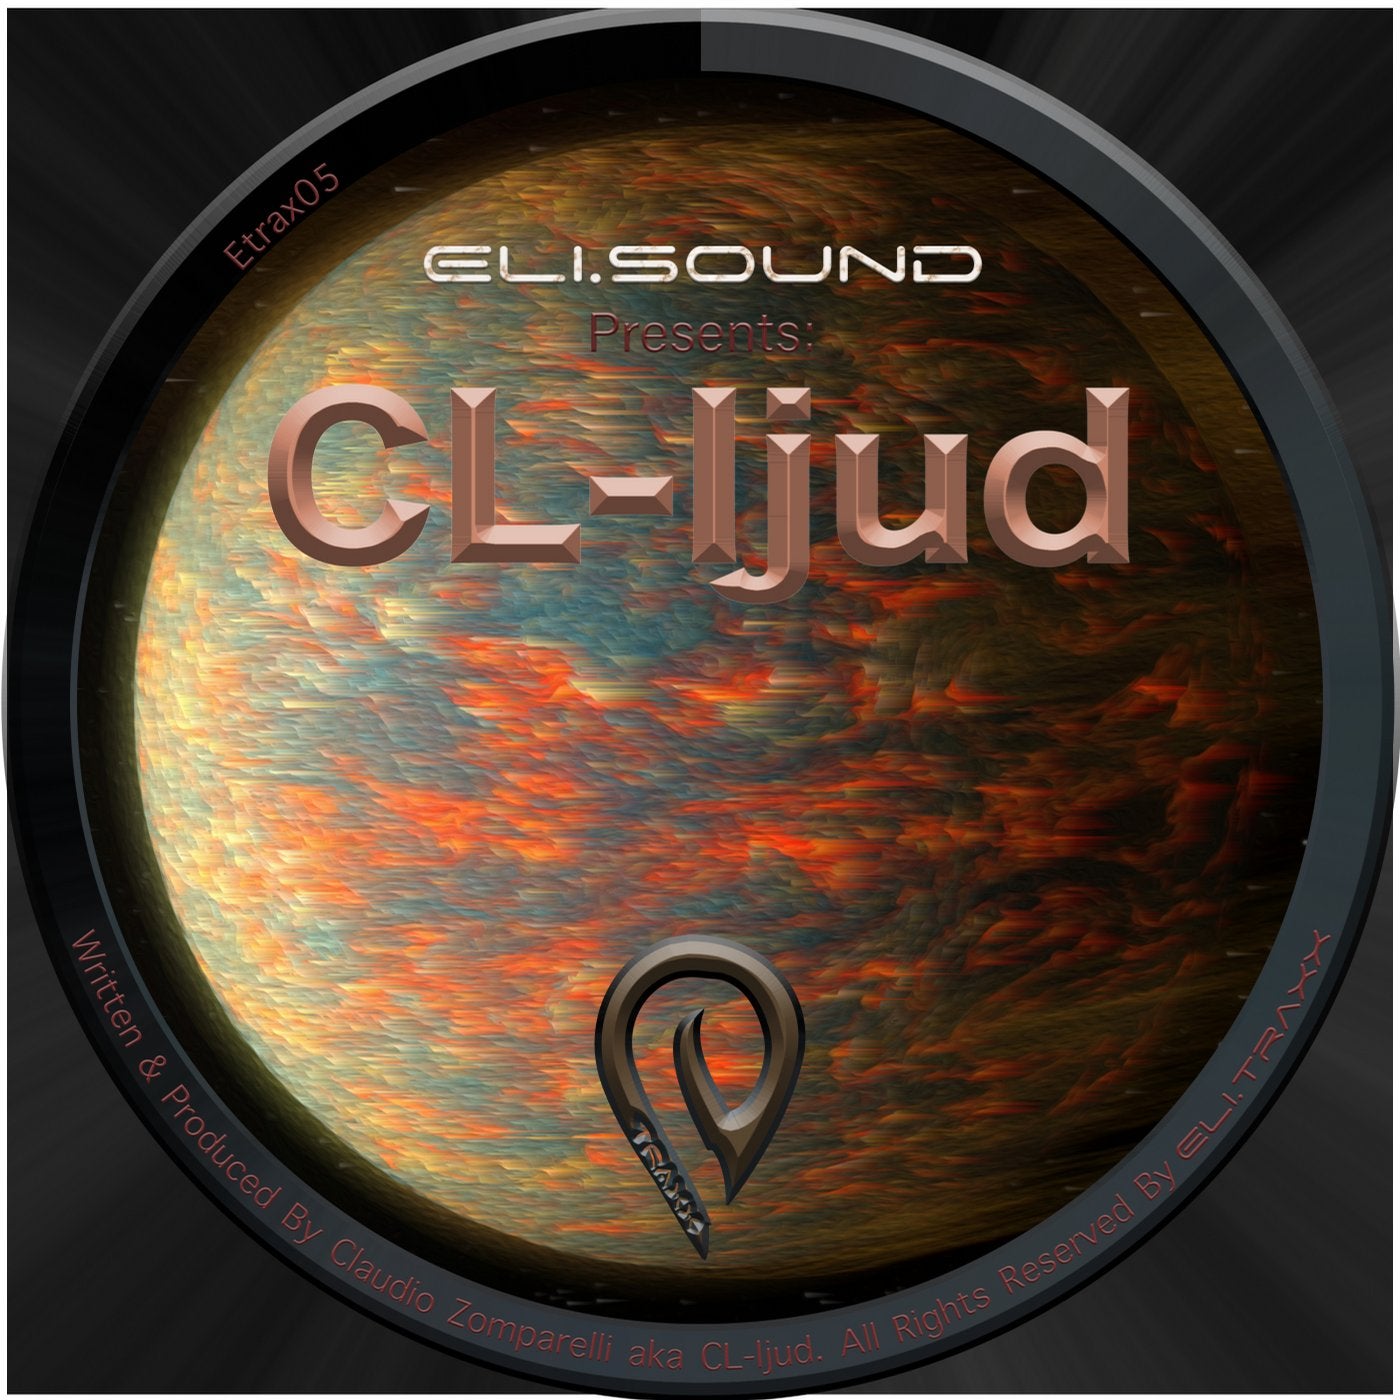 Eli.Sound Presents: CL-Ljud From Italy